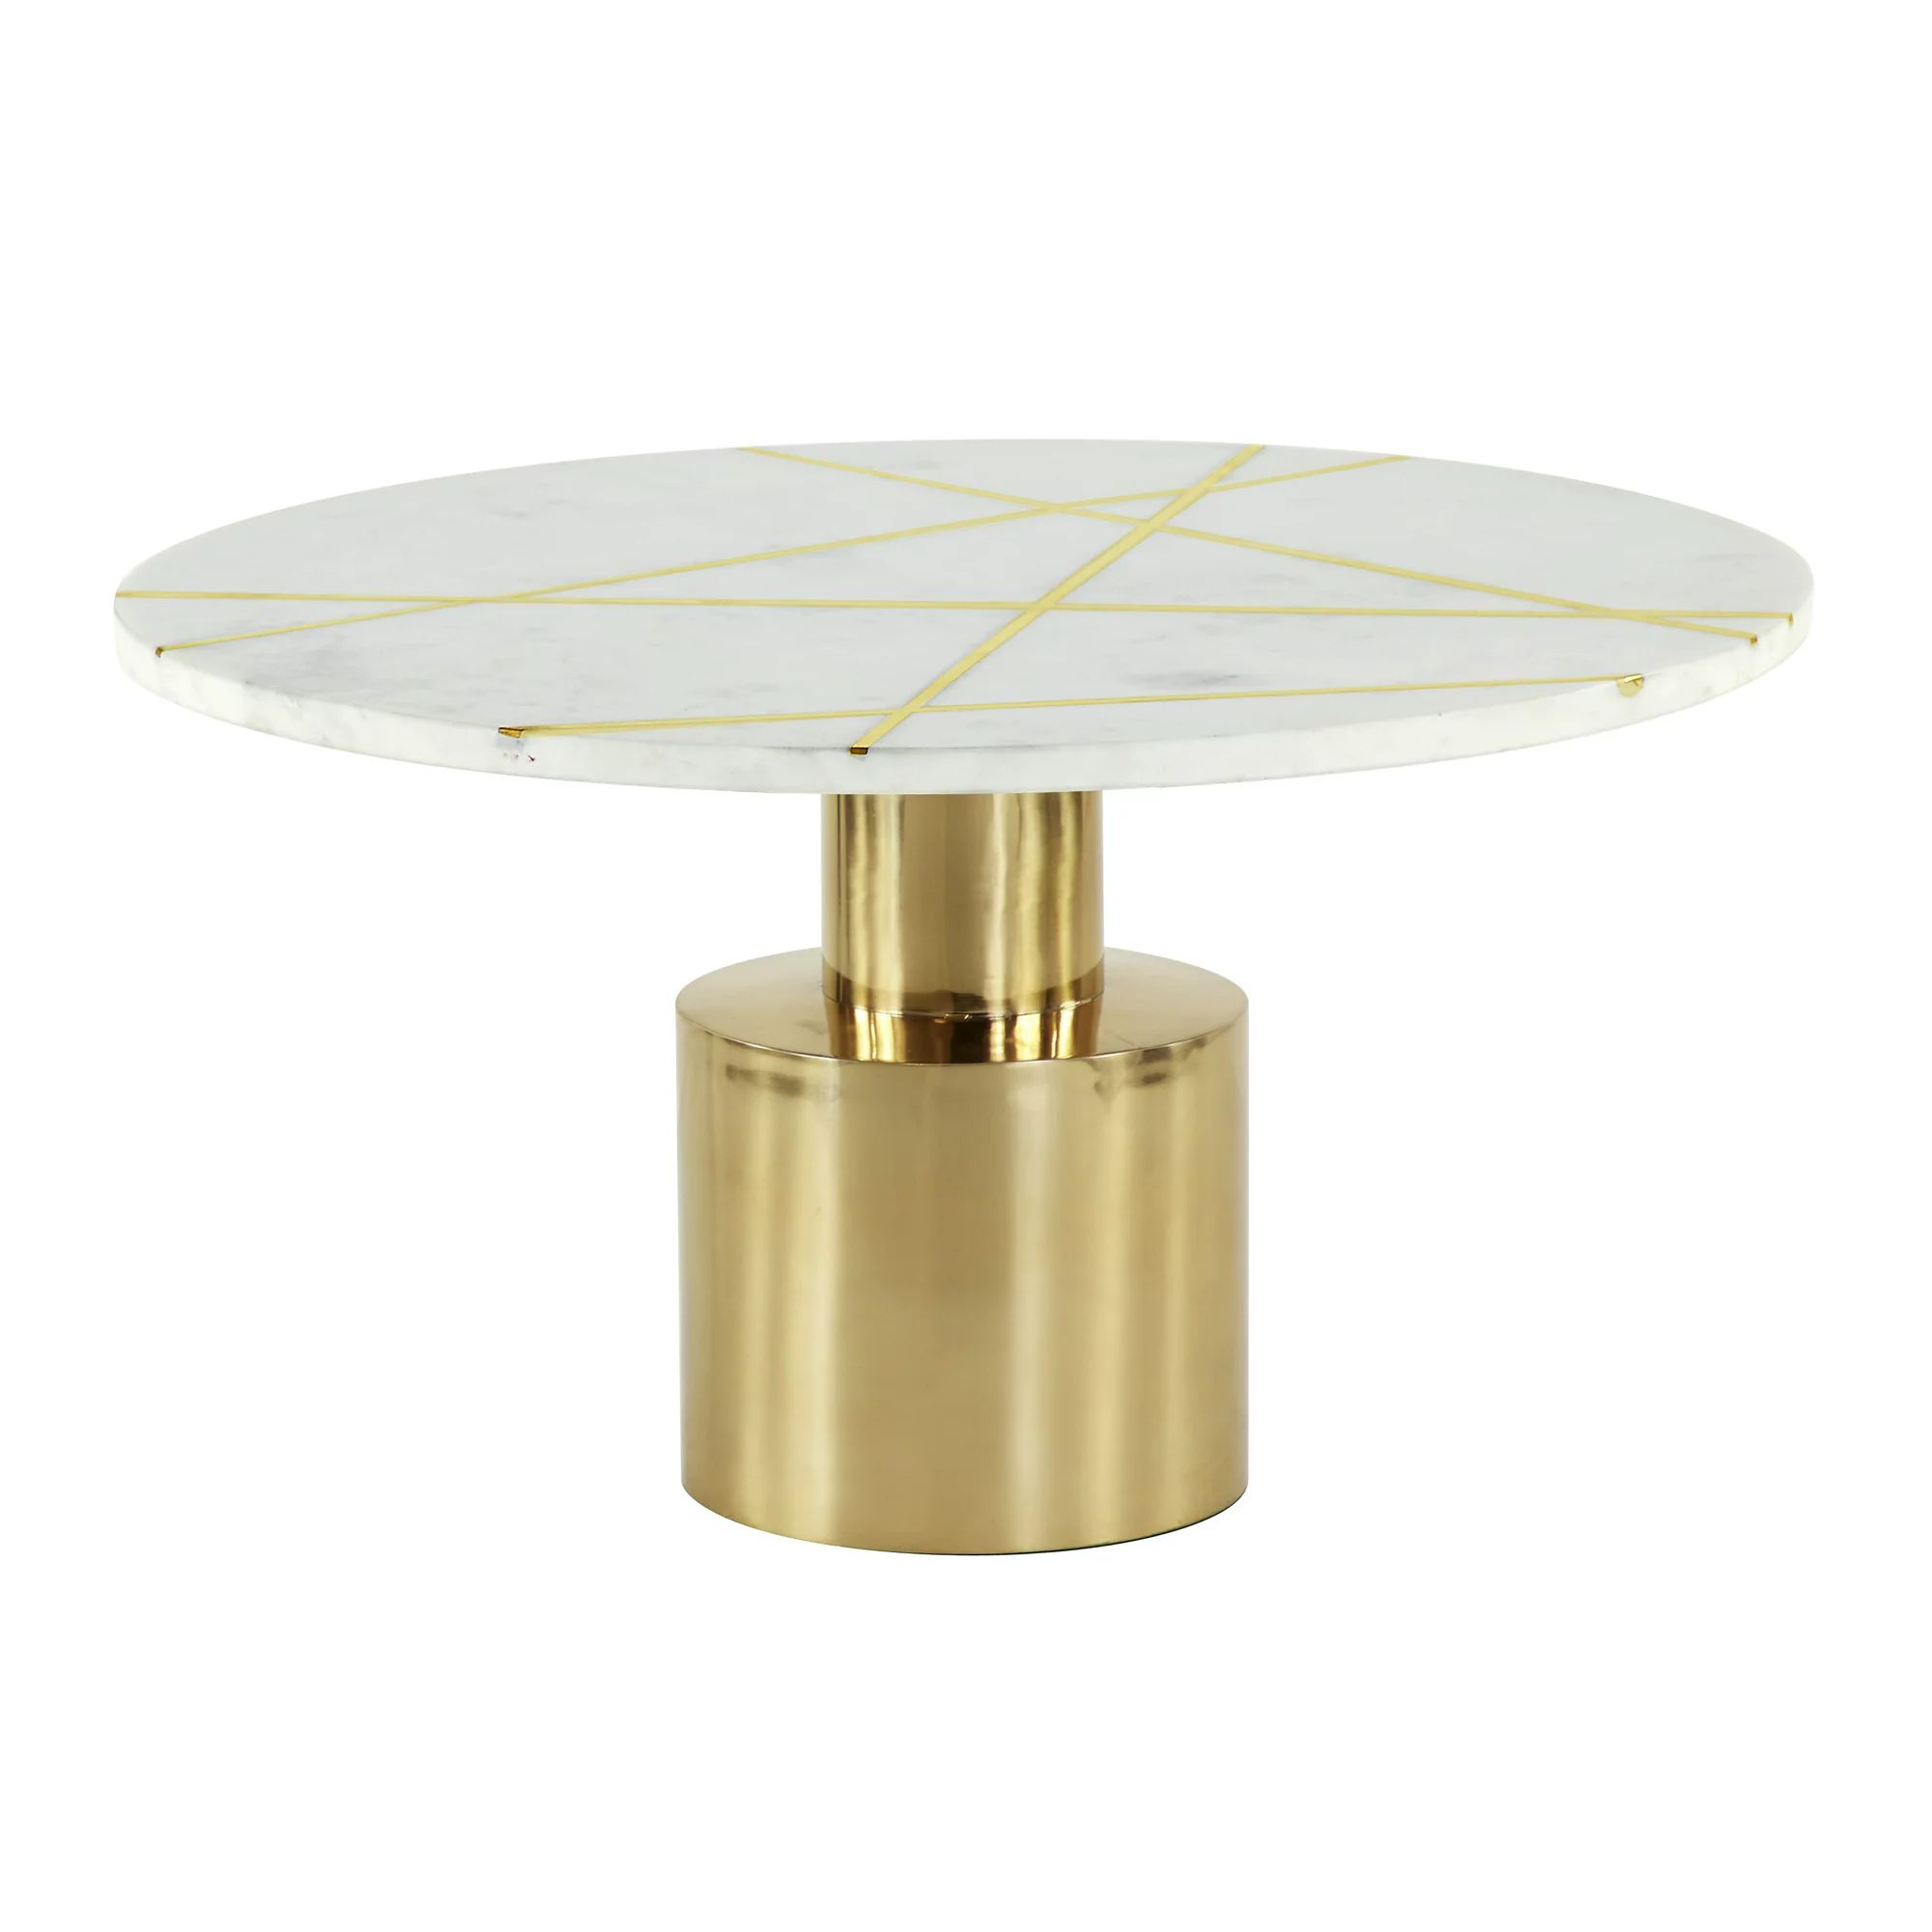 Decmode Round Light Marble Table With Gold Aluminum Base And Patterned Inlay, 20" X 17" | Walmart (US)